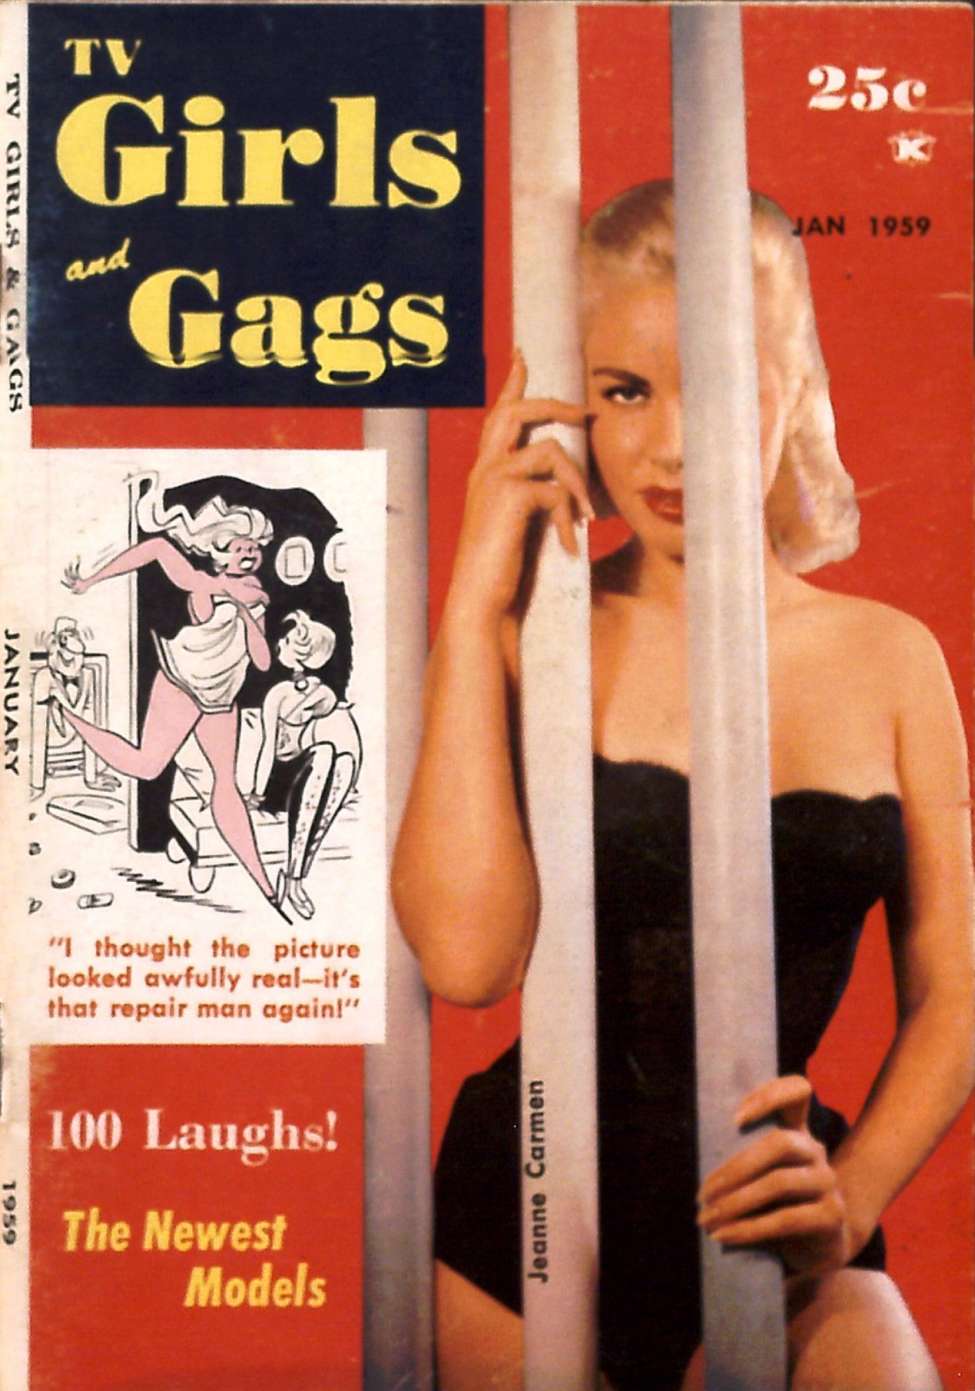 Book Cover For TV Girls and Gags v6 1